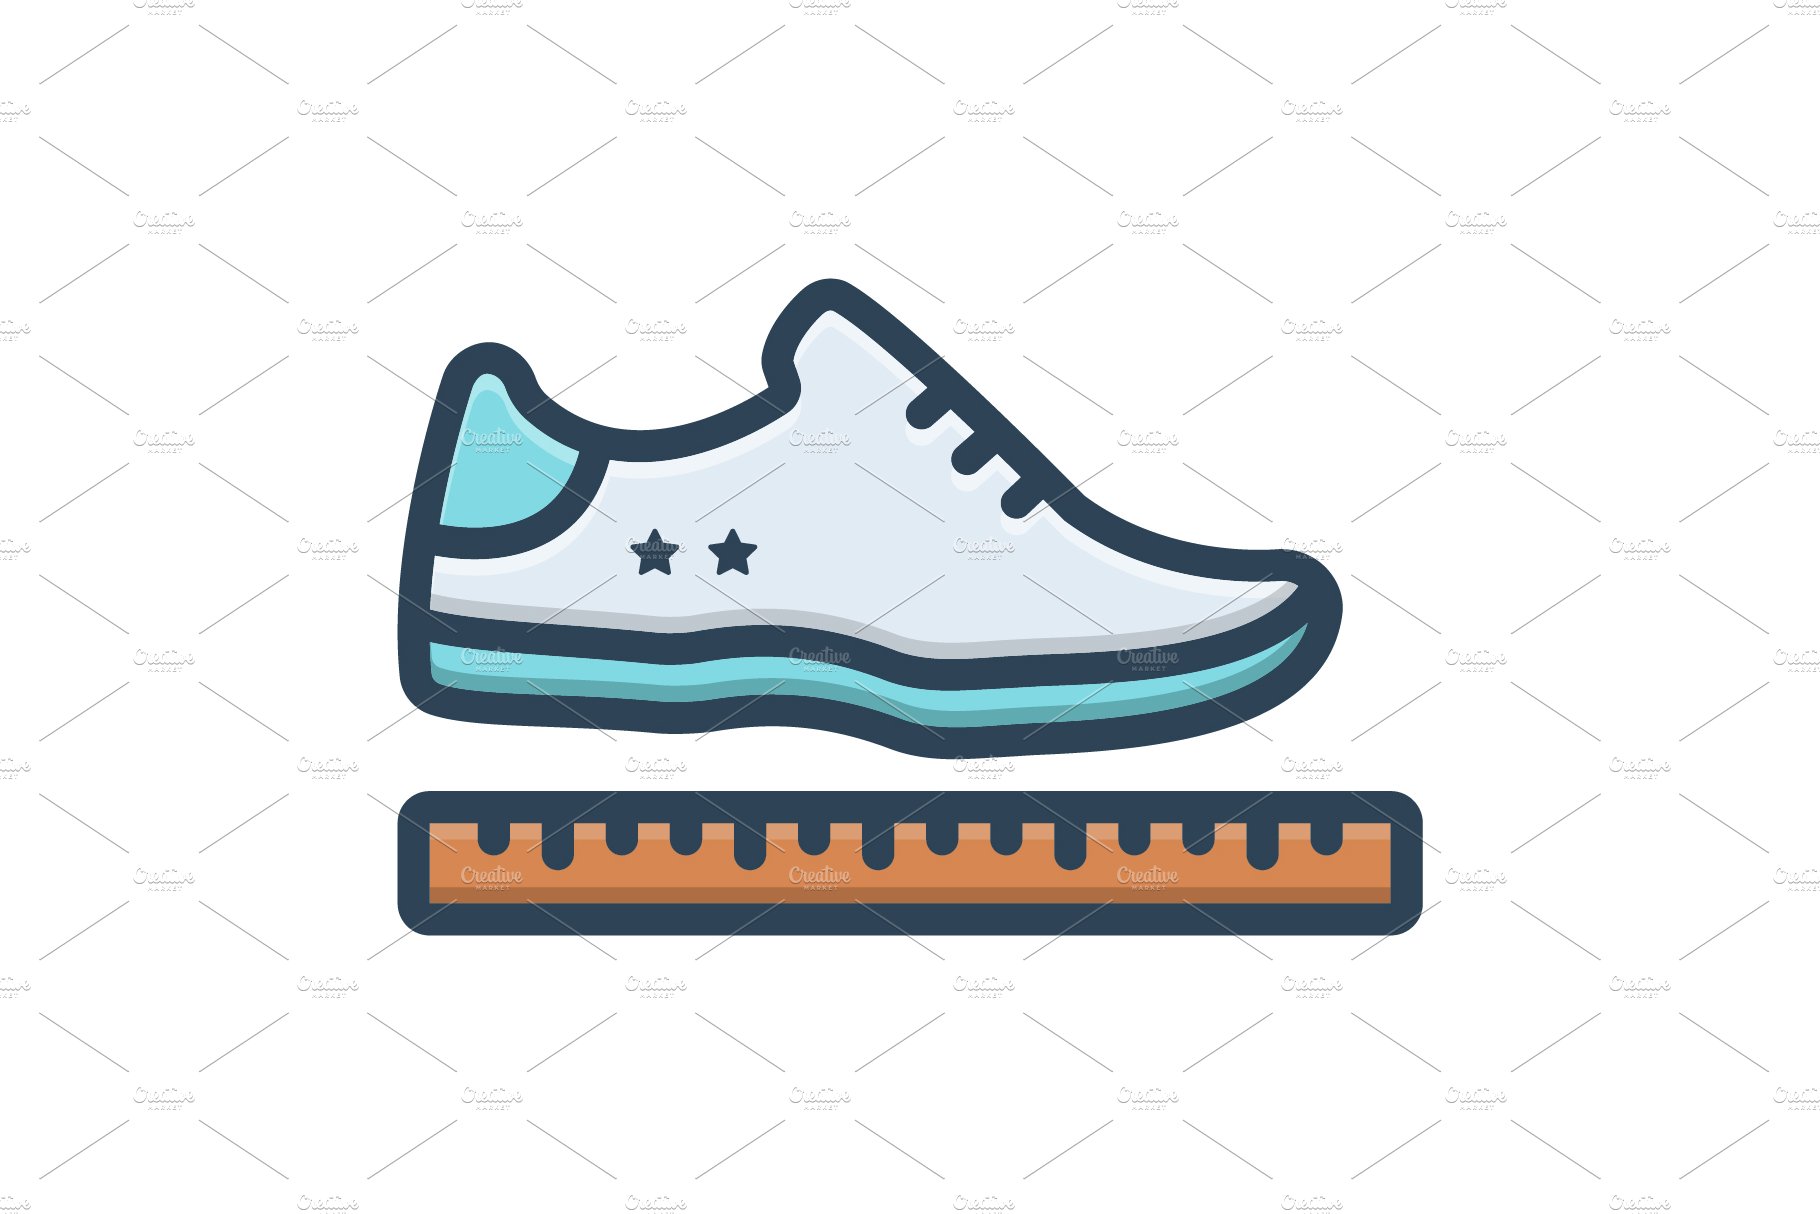 Sized shoe color icon cover image.